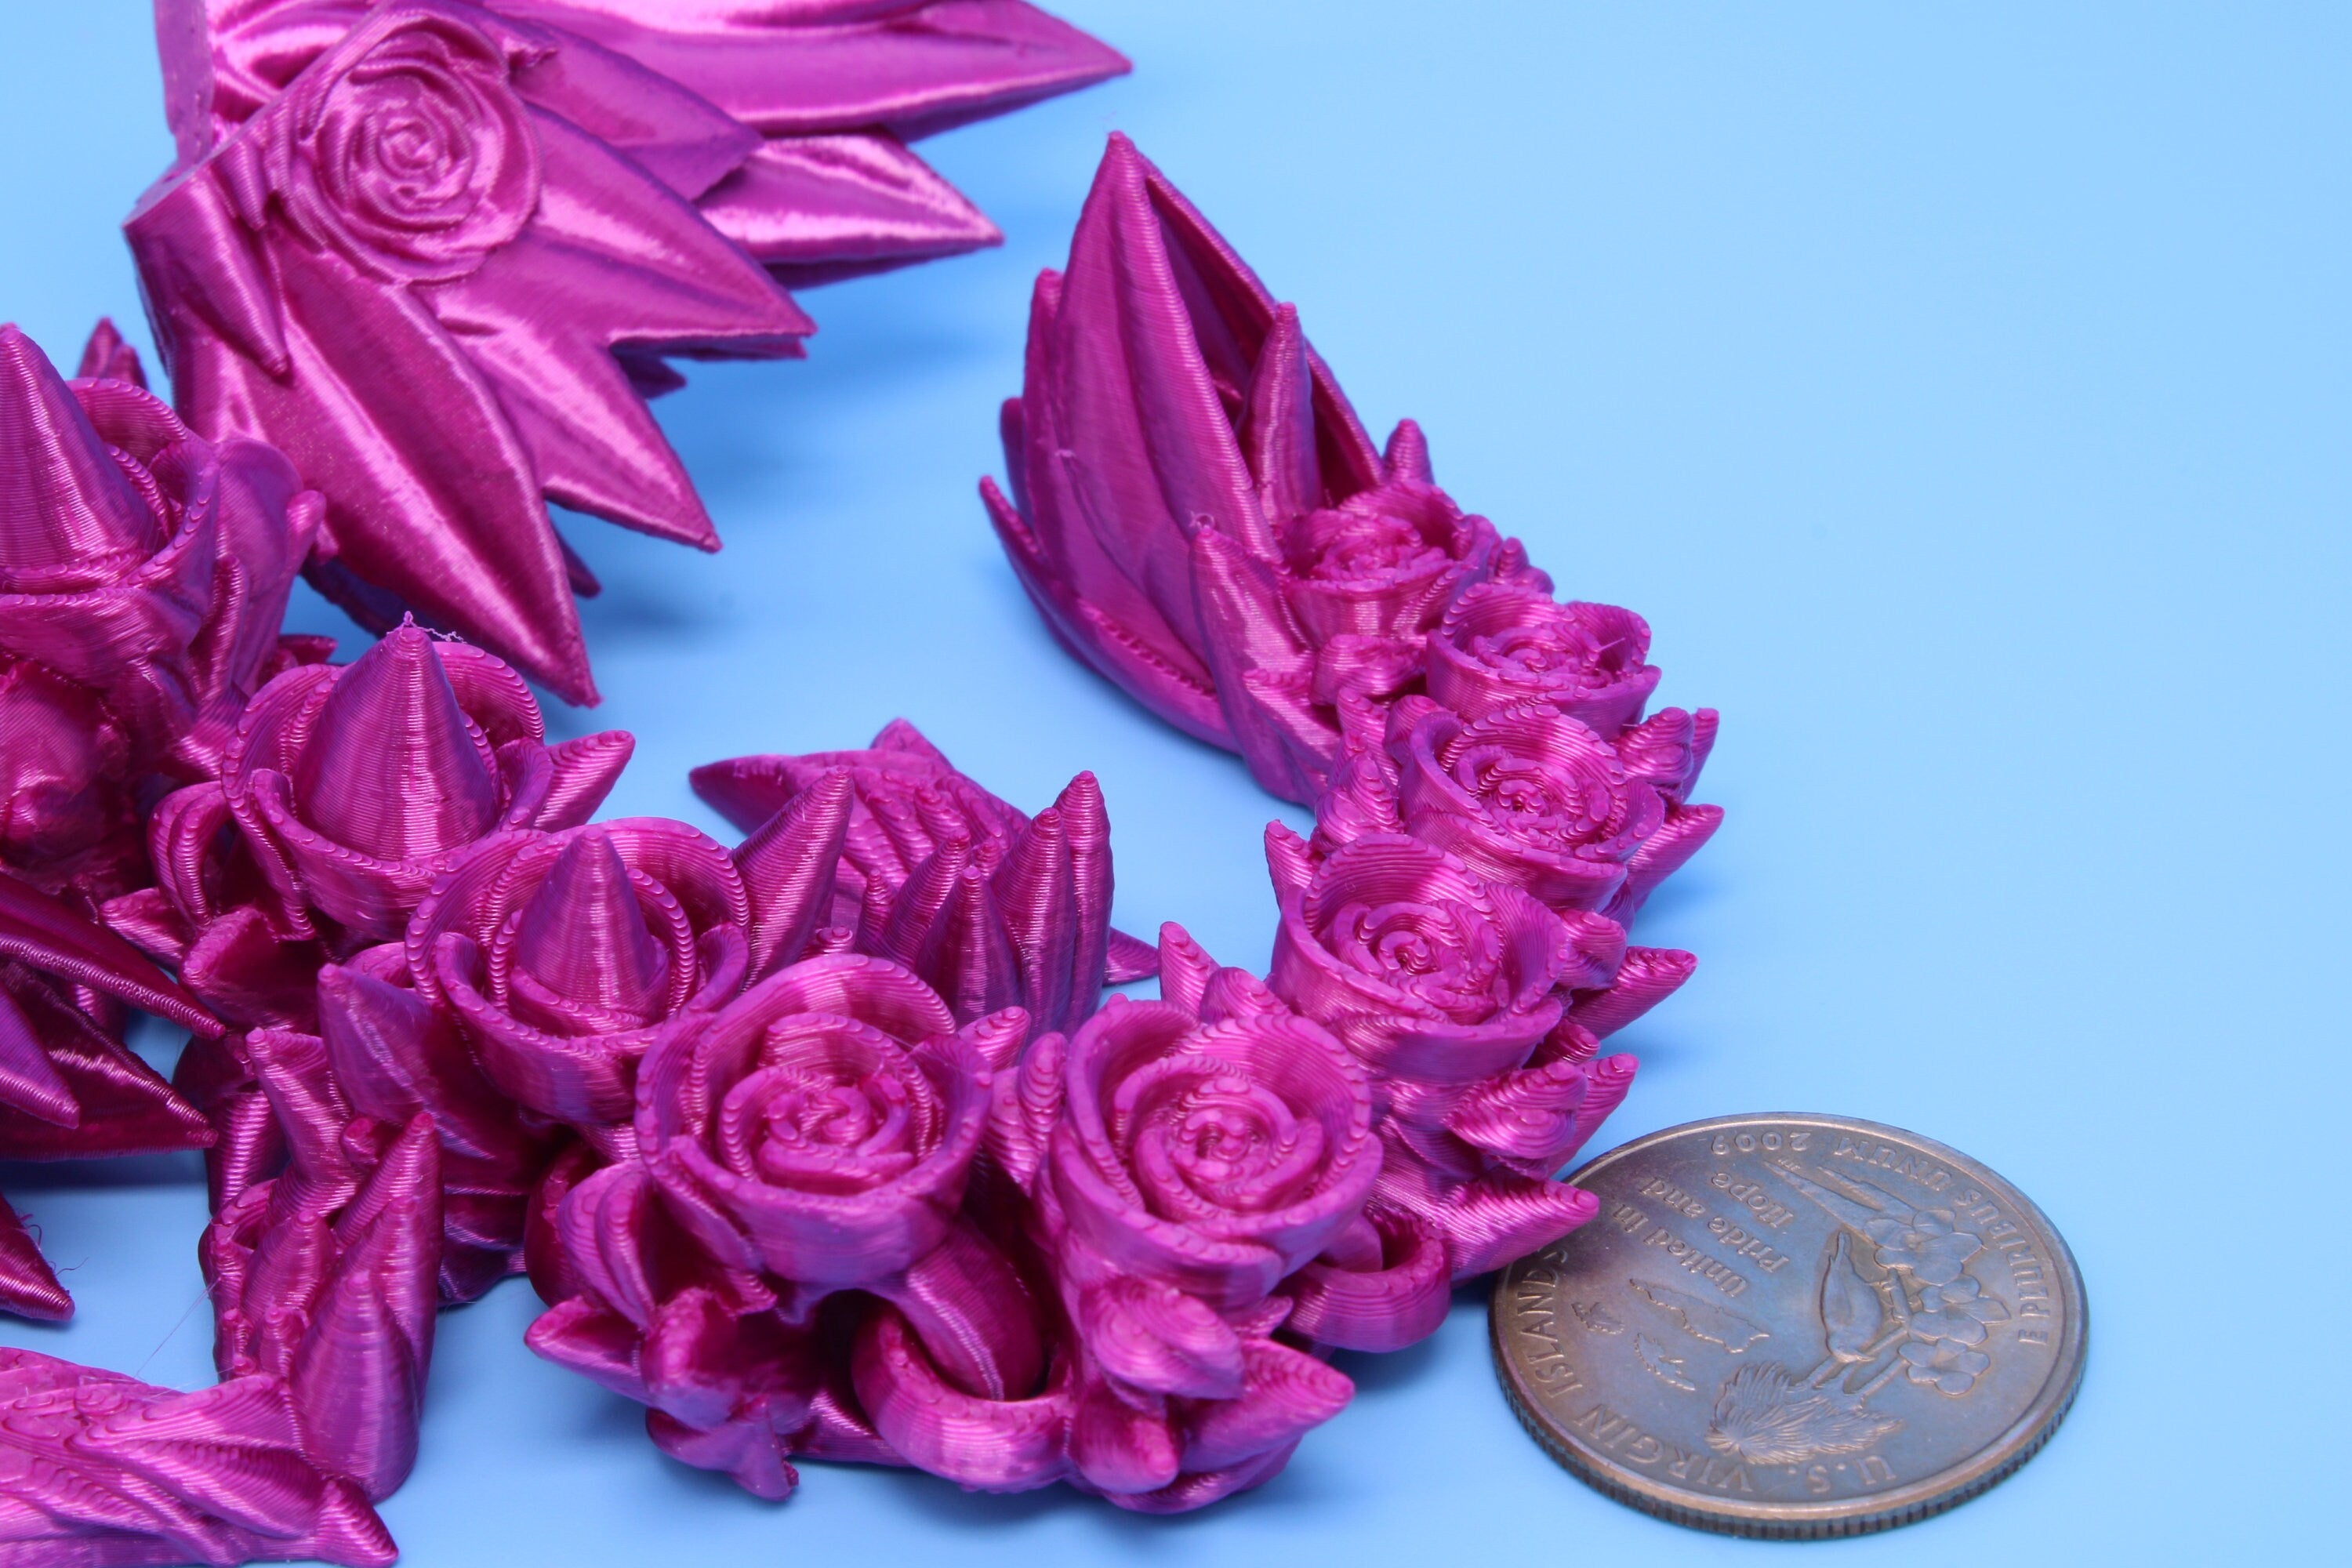 Baby Rose Wing Dragon | Pink | 3D Printed | Fidget | Flexi Toy 8.5 in. | Stress Relief Gift